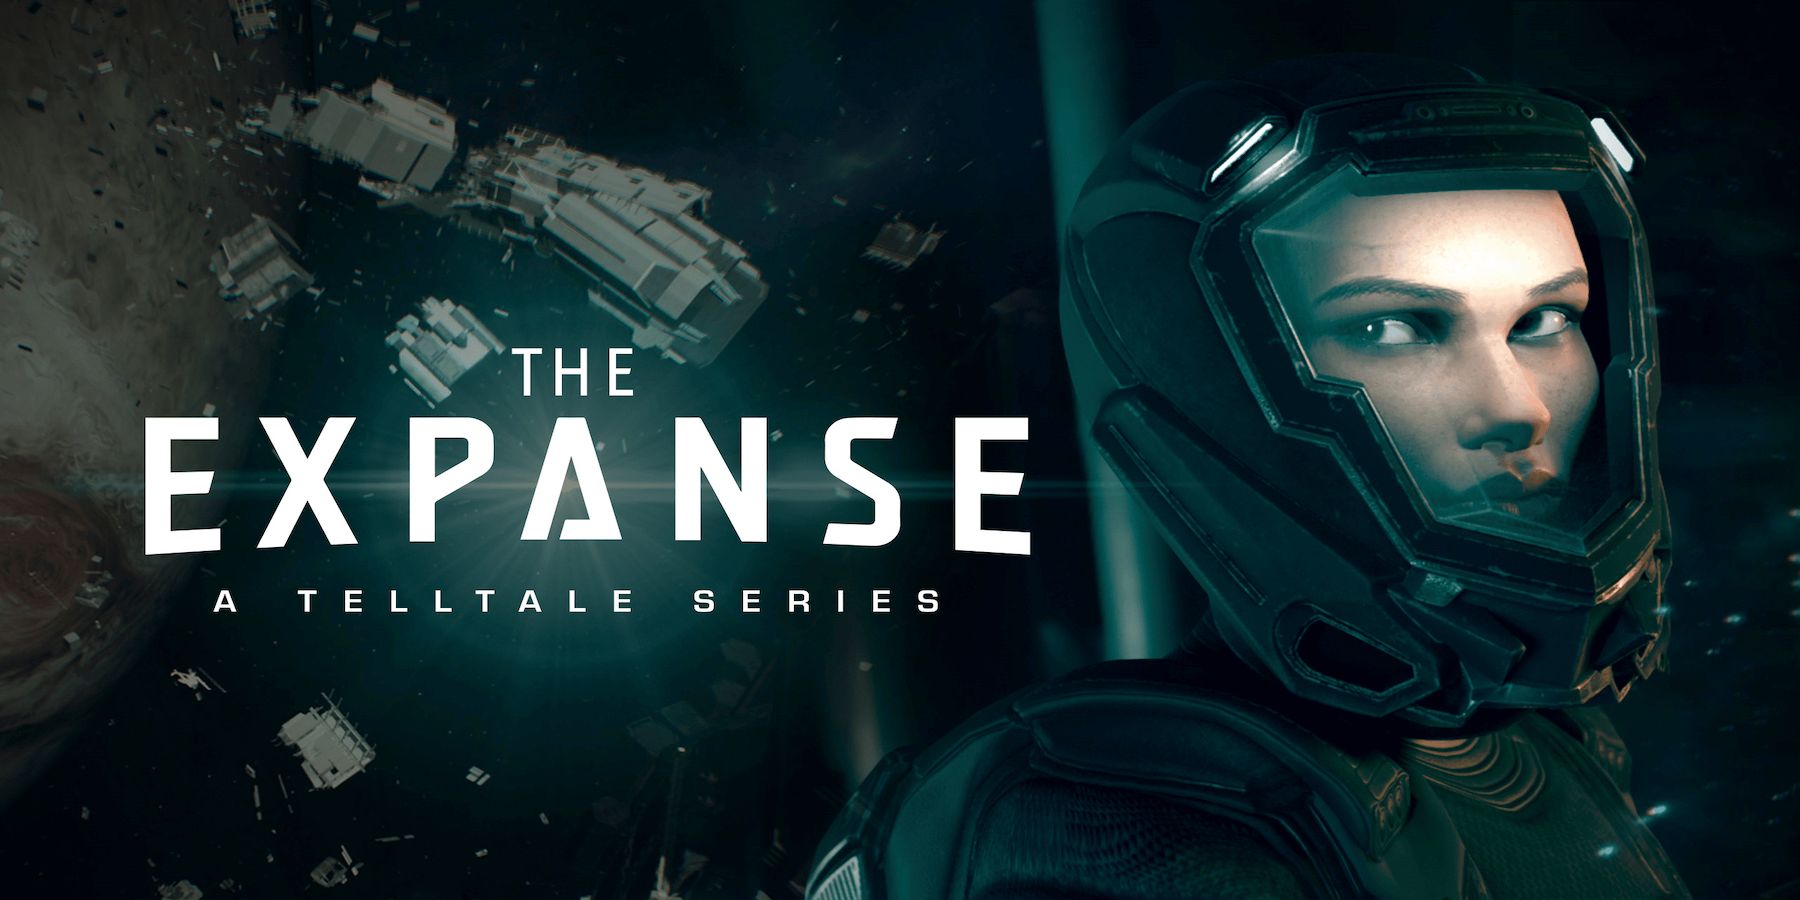 THE EXPANSE FEATURE 1